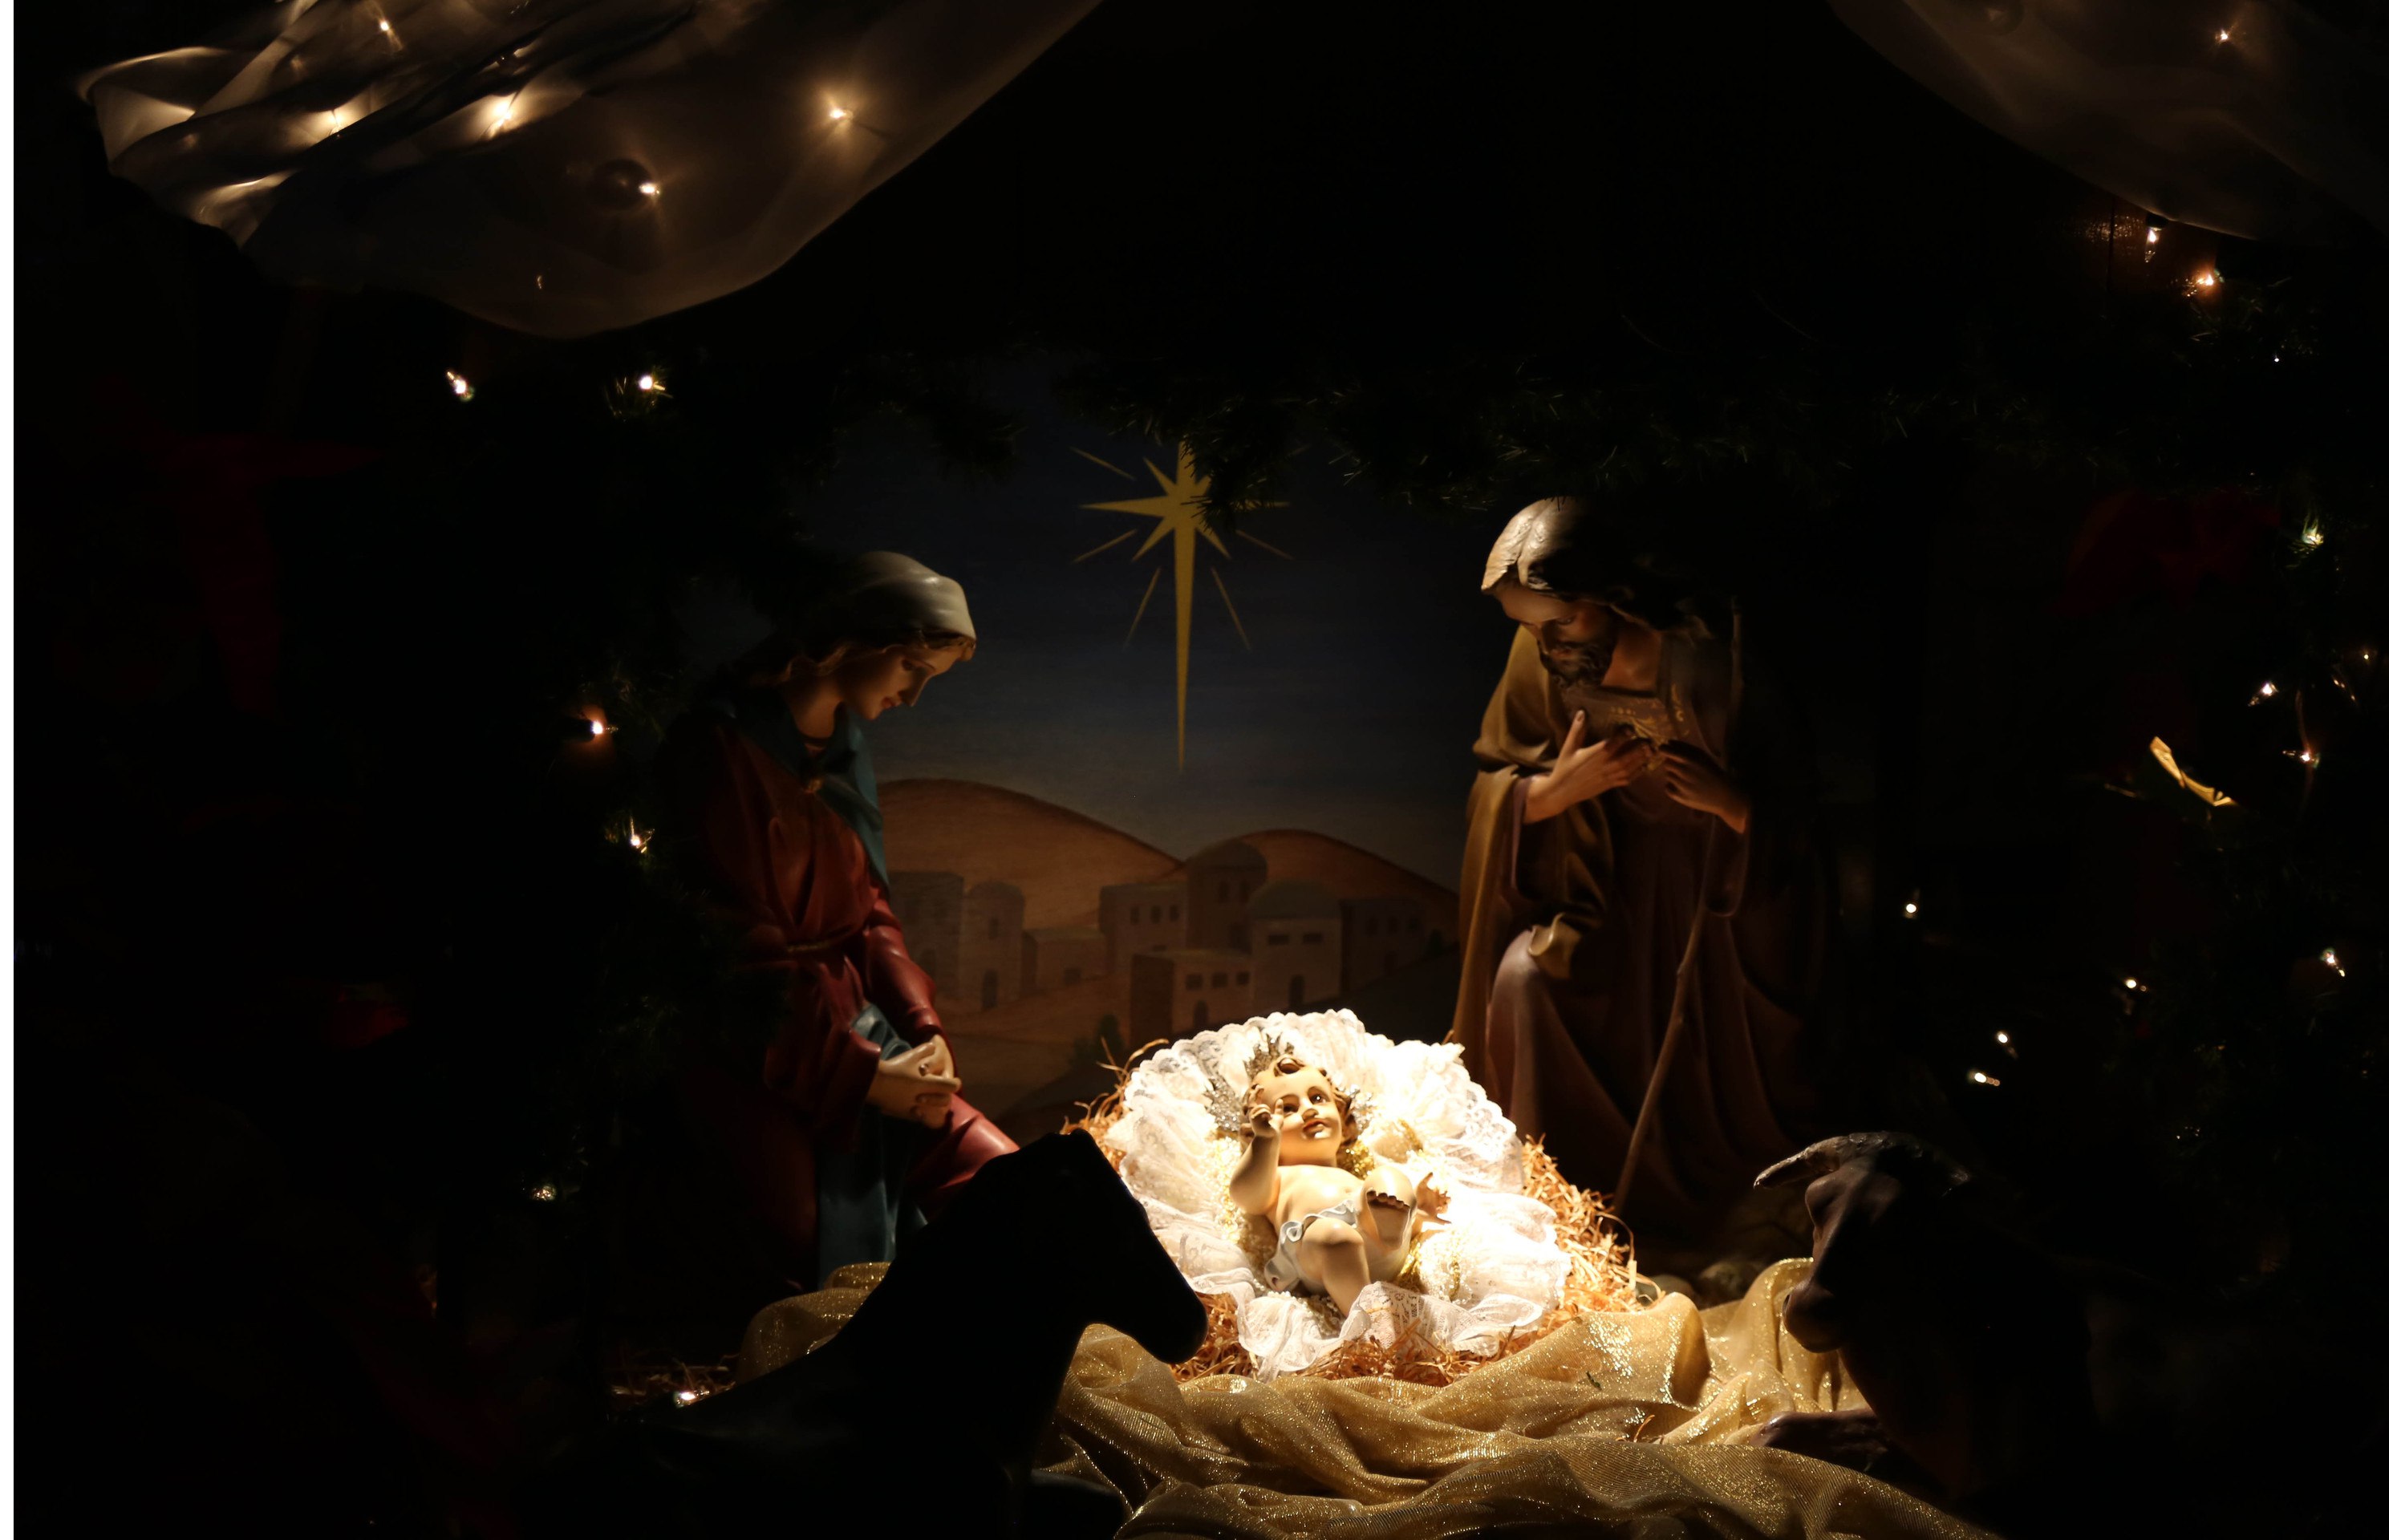 Statues of baby Jesus in manger with Mary and Joseph next to him